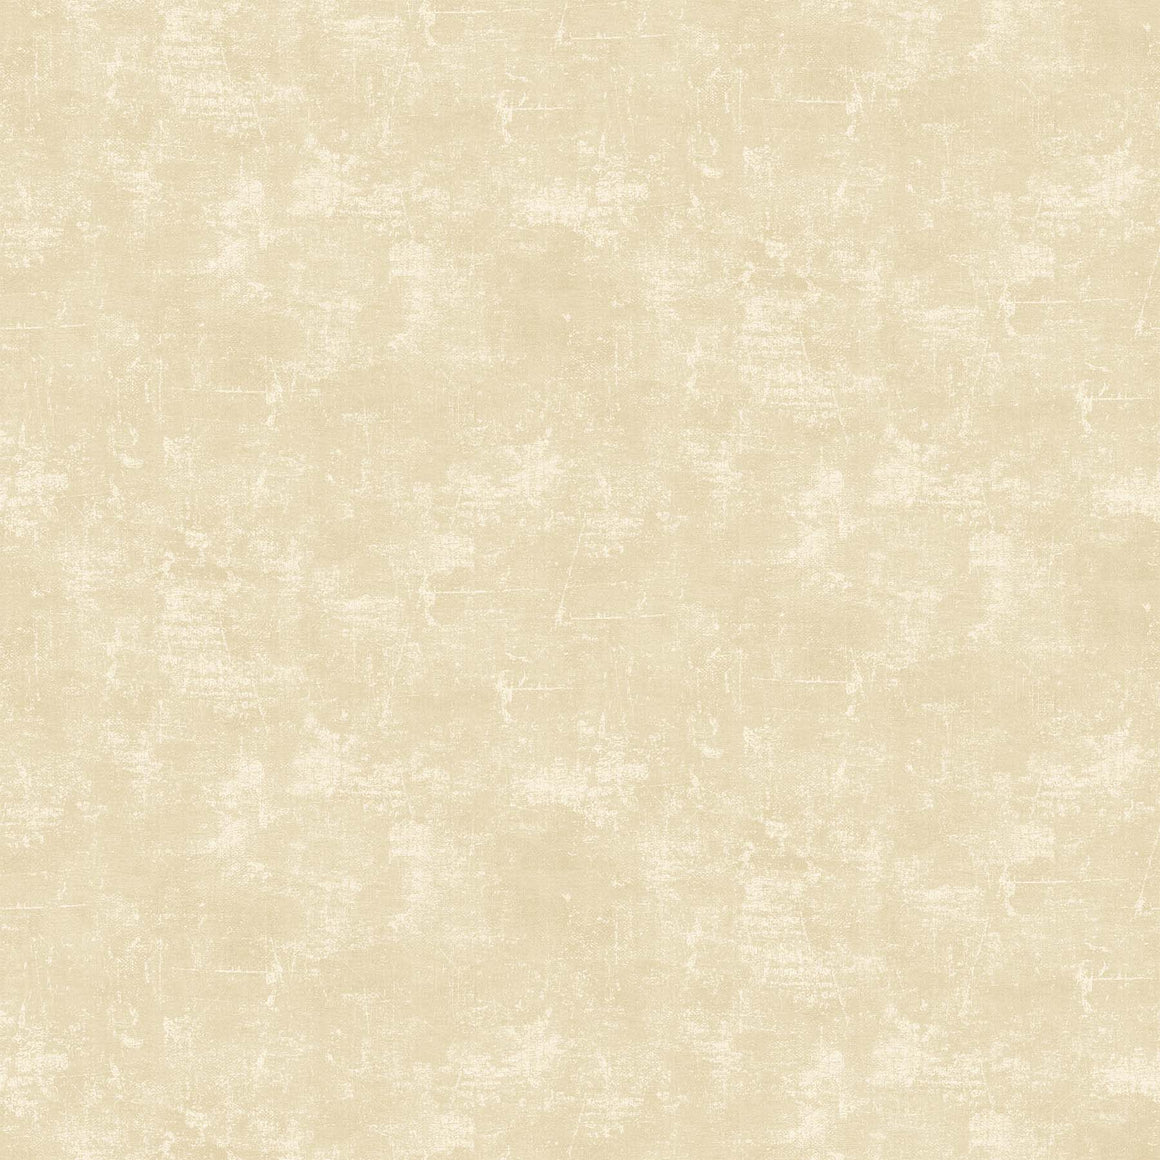 Toasted Marshmallow- Canvas Texture - 9030-12, Designer Fabric, Northcott, [variant_title] - Mad About Patchwork